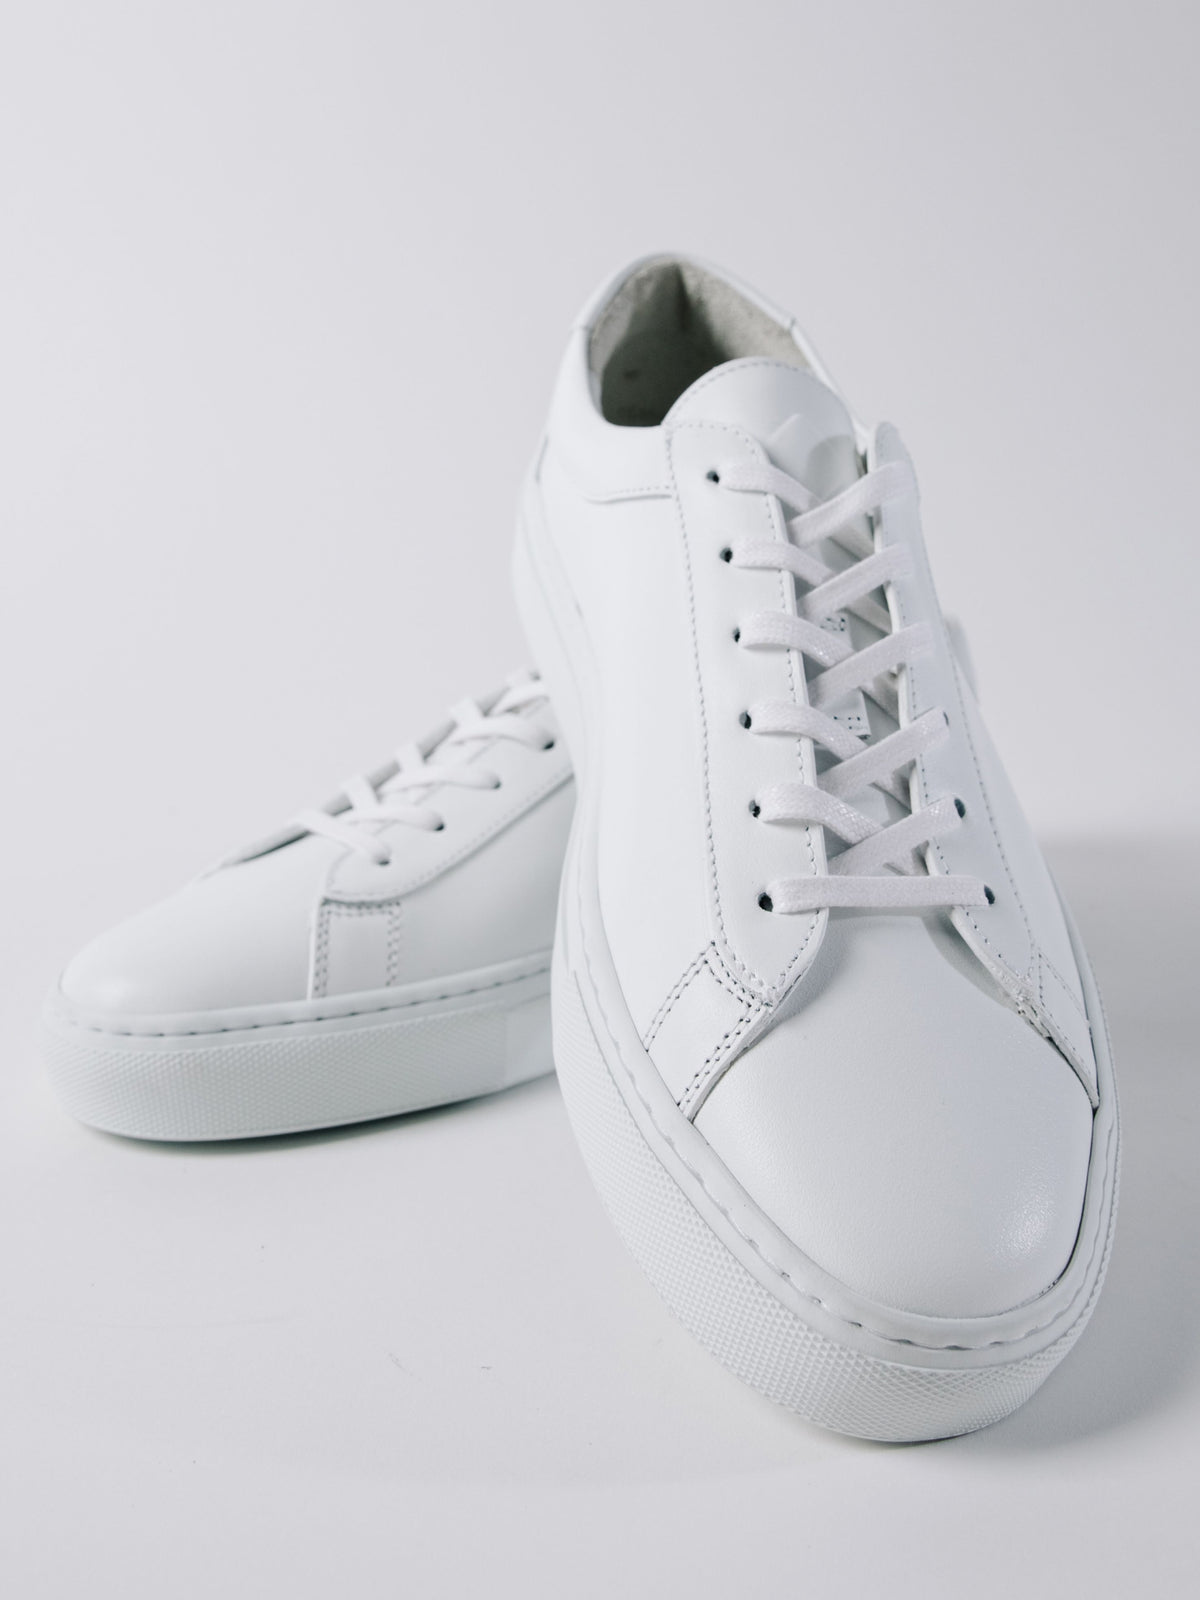 This Is How to Clean White Sneakers | Trusted Since 1922